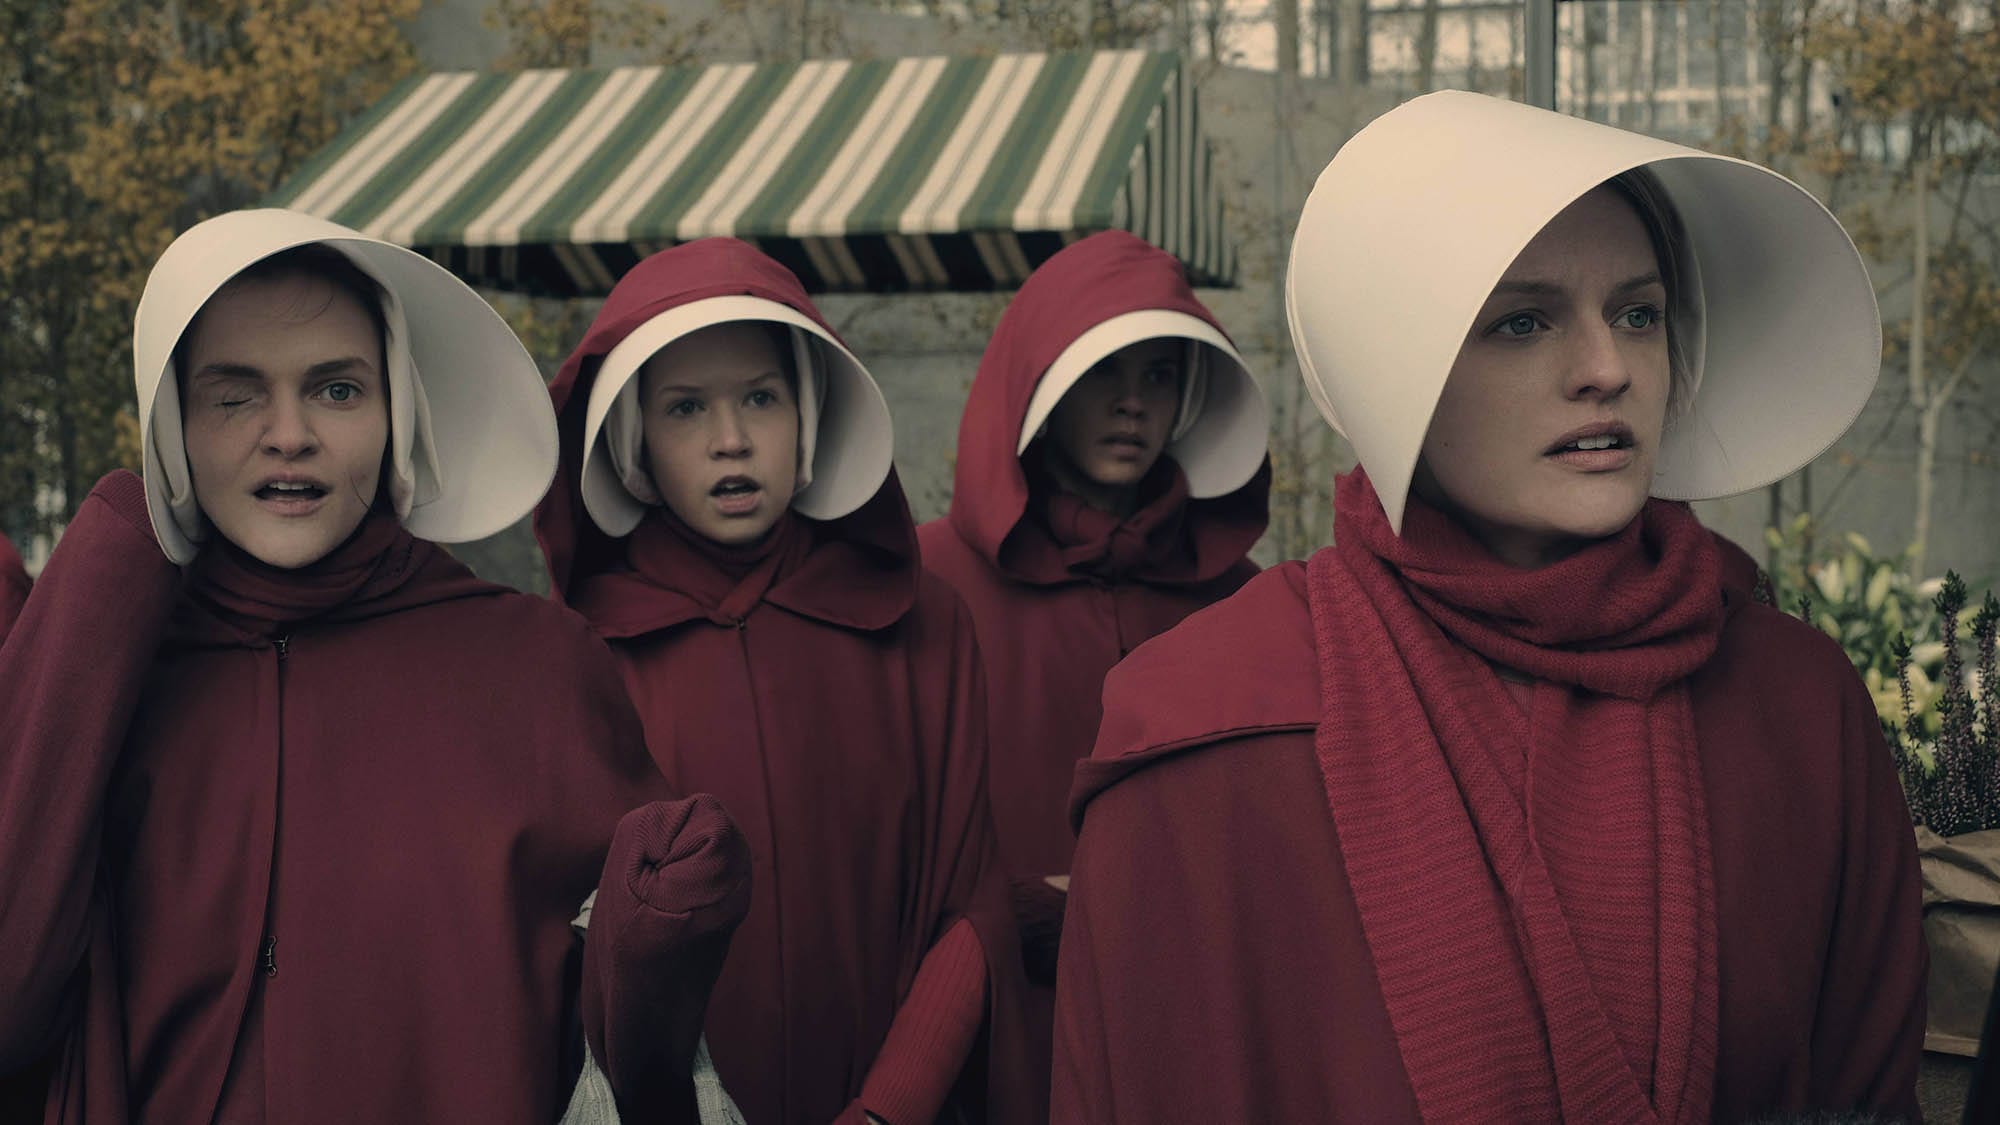 'The Handmaid's Tale' show is a form of escapism, offering insight into a terrifying world. However, its tropes are all based on real-life events.